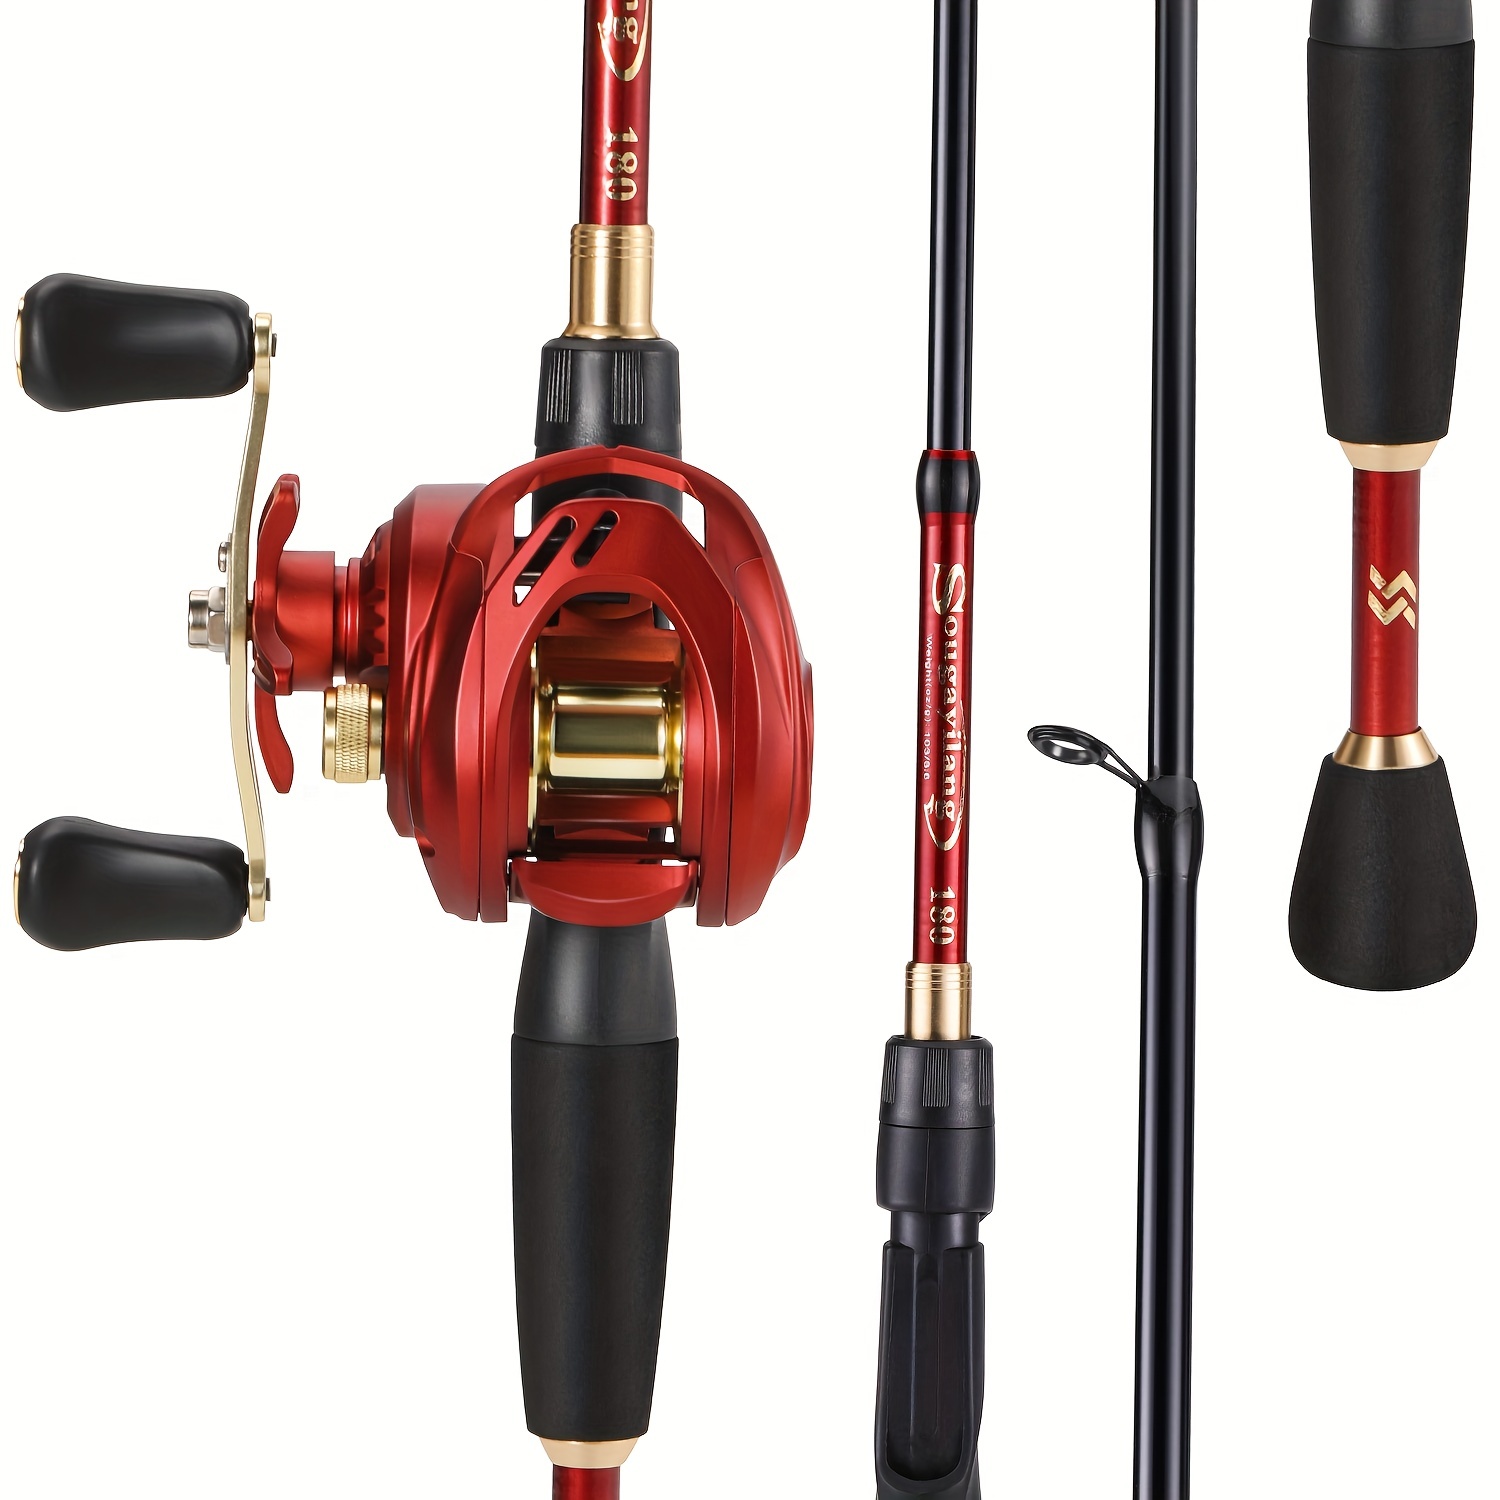 Buy Casting Fishing Reels Online by Copperstate Tackle - Issuu